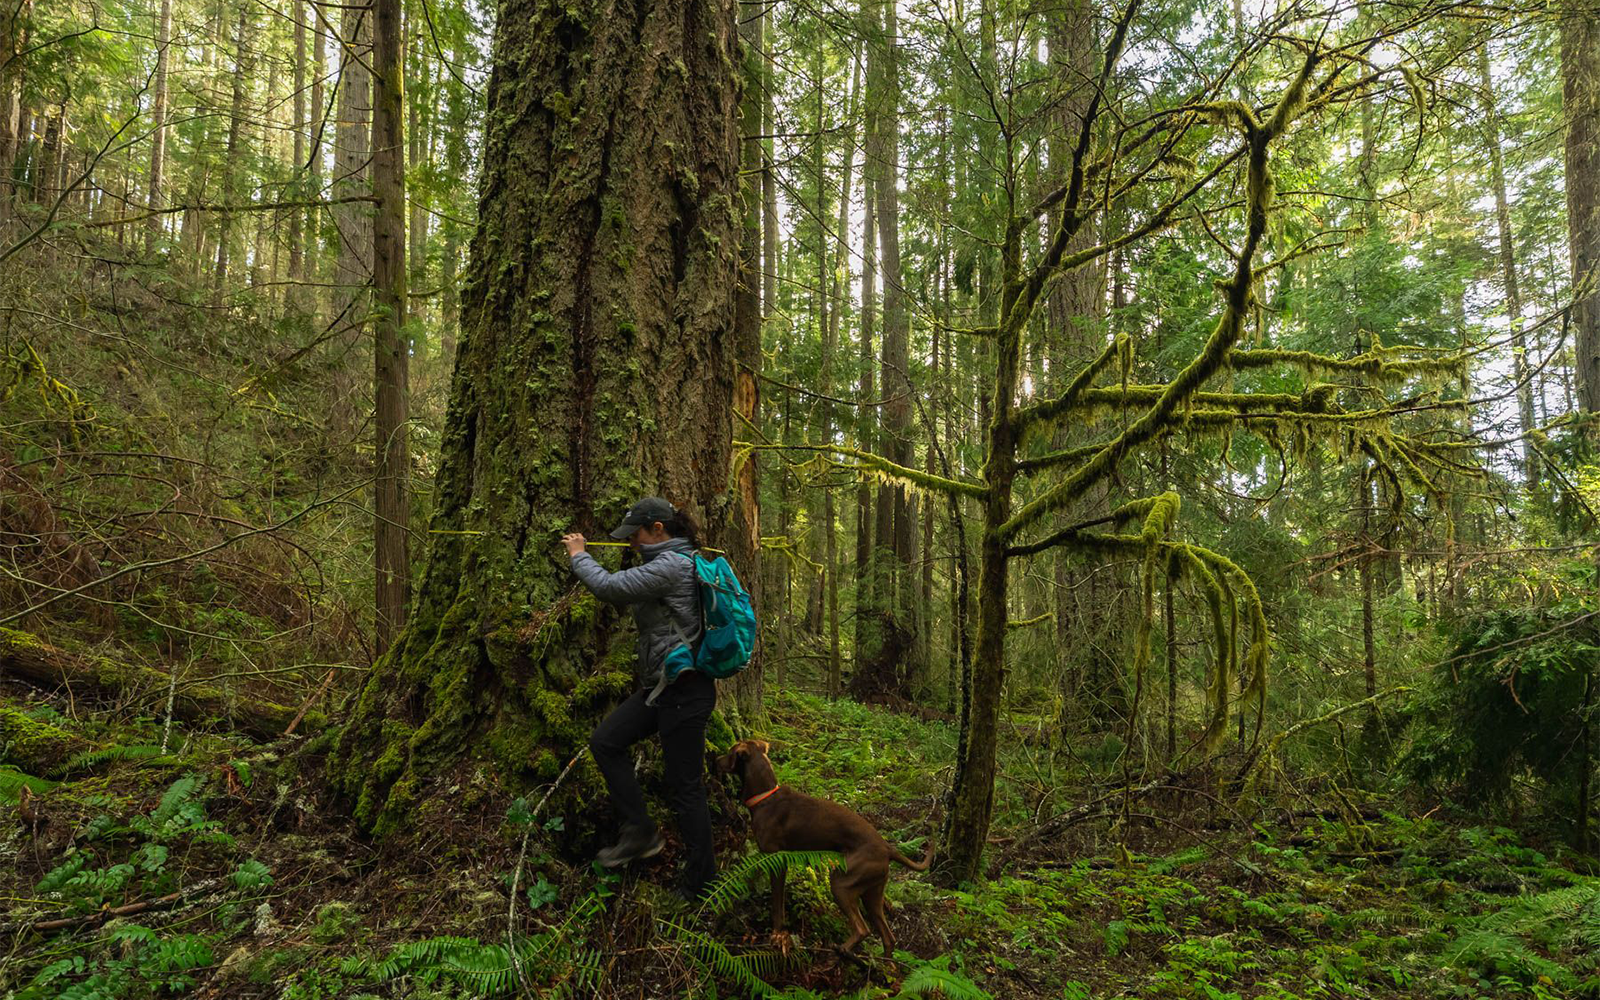 Press Release: Federal Agencies Release Joint Report on Mature and Old-Growth Forests